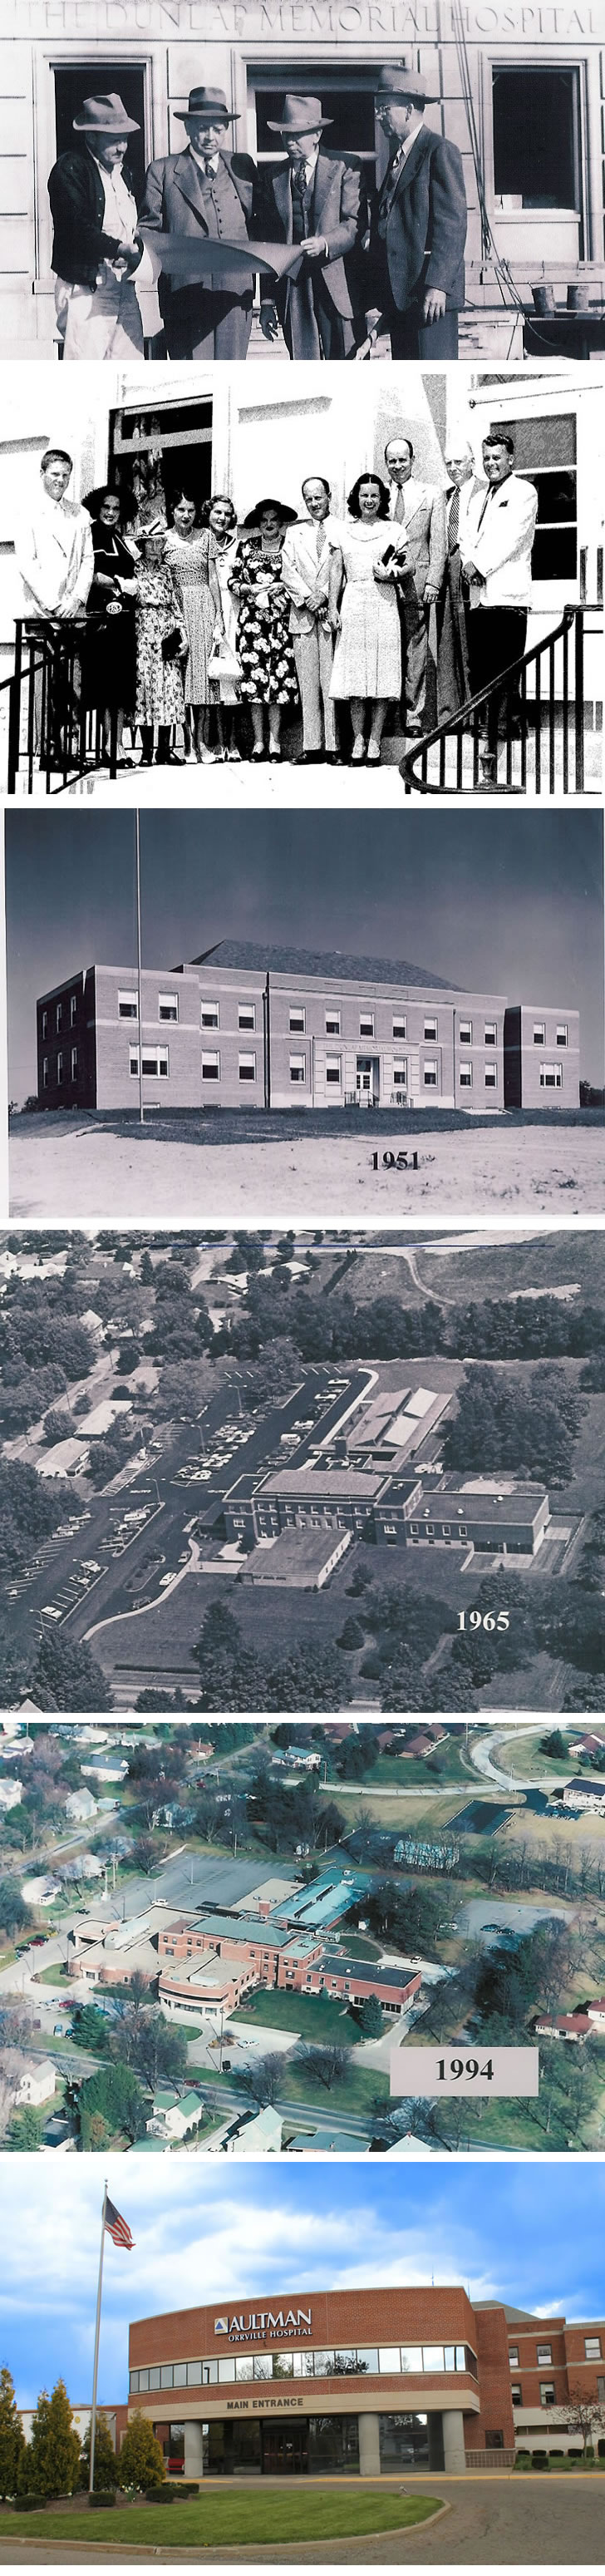 https://www.aultmanorrville.org/images/default-source/page-images/aultman-orrville-hospital-through-the-years.jpg?sfvrsn=0